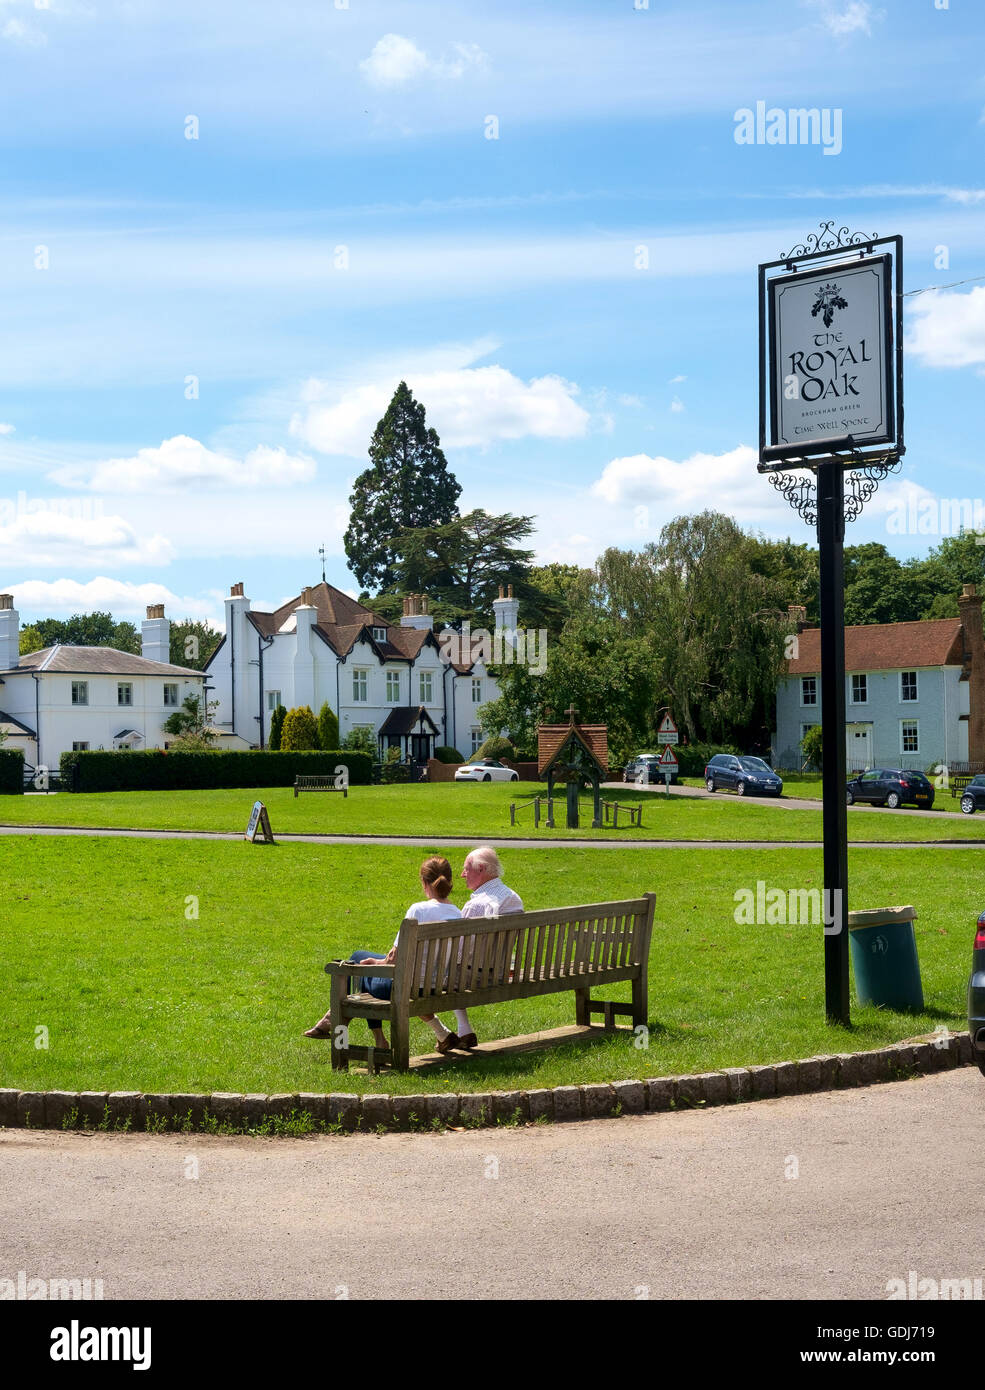 The village green of Brockham, Surrey, UK - a man and a woman sit on a bench outside The Royal Oak pub Stock Photo